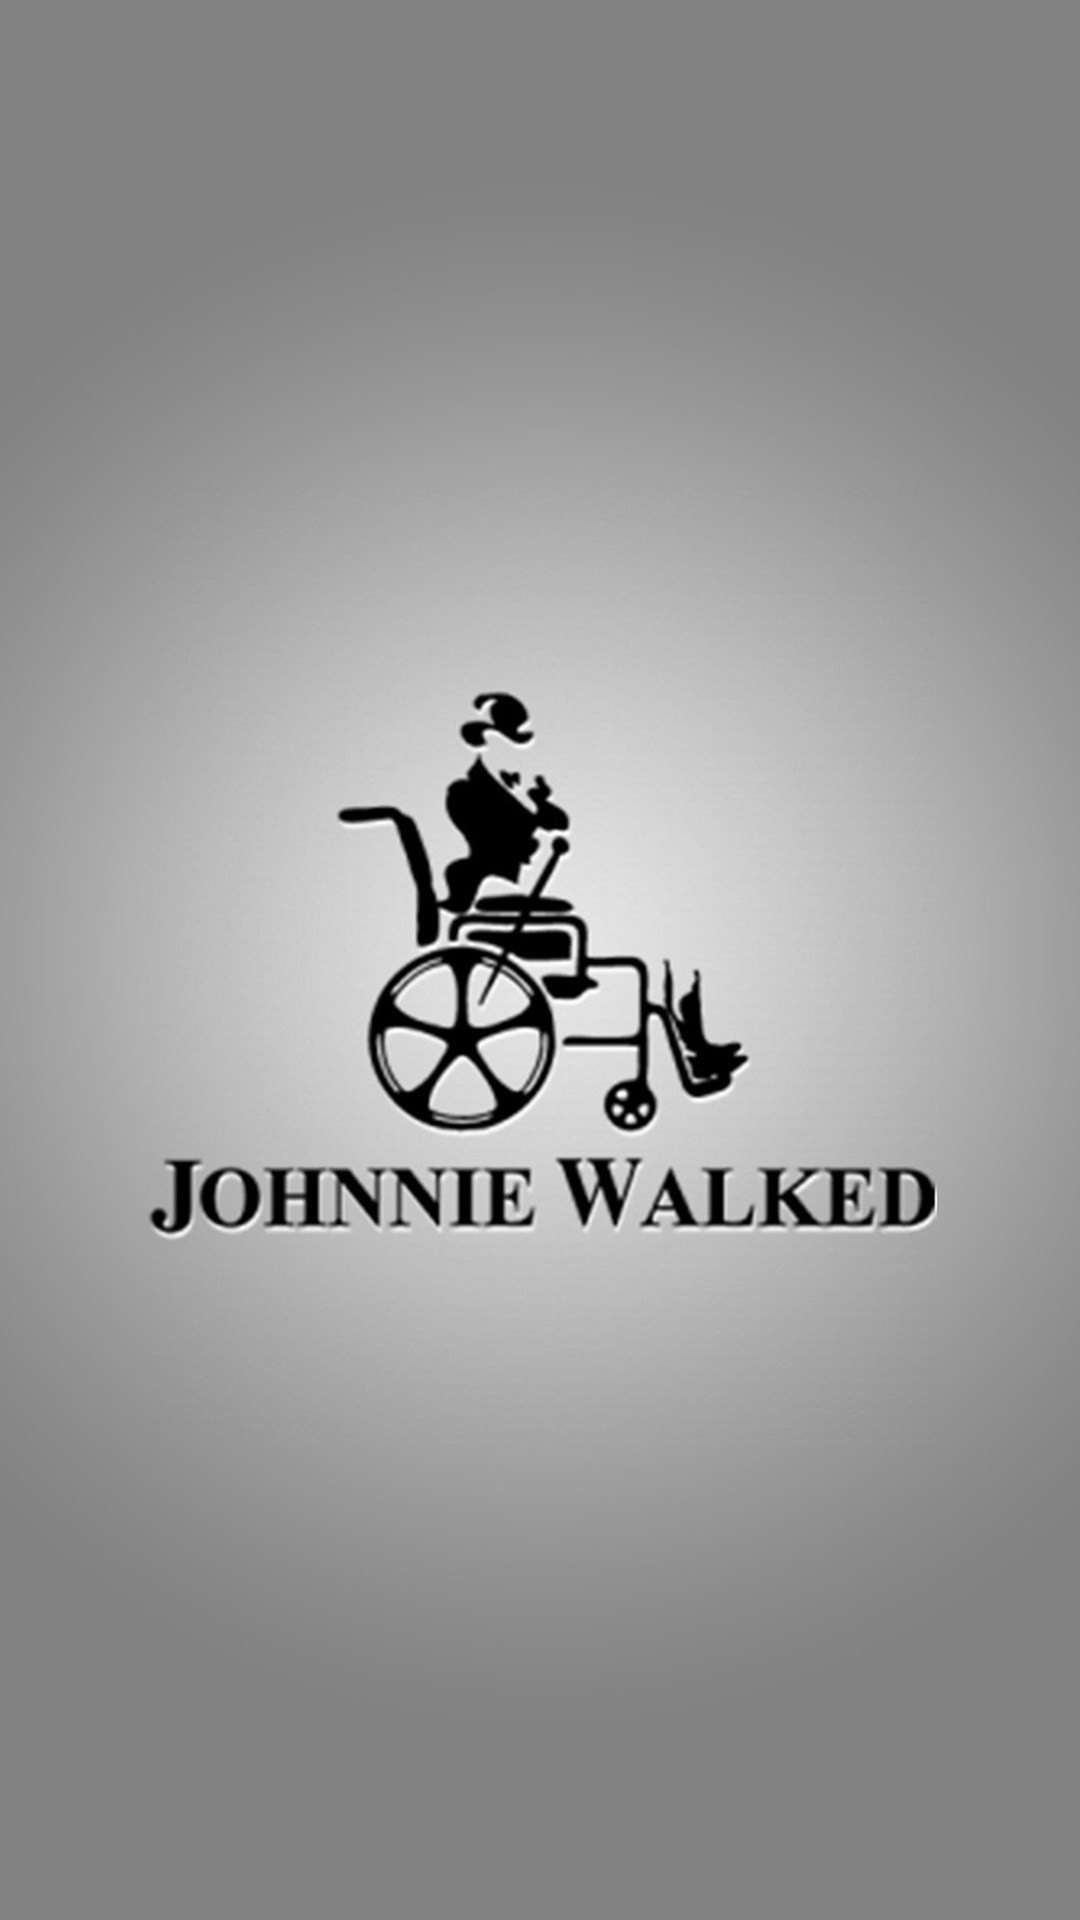 1080x1920 Download Johnnie Walked Apple iPhone 7 HD Wallpapers .